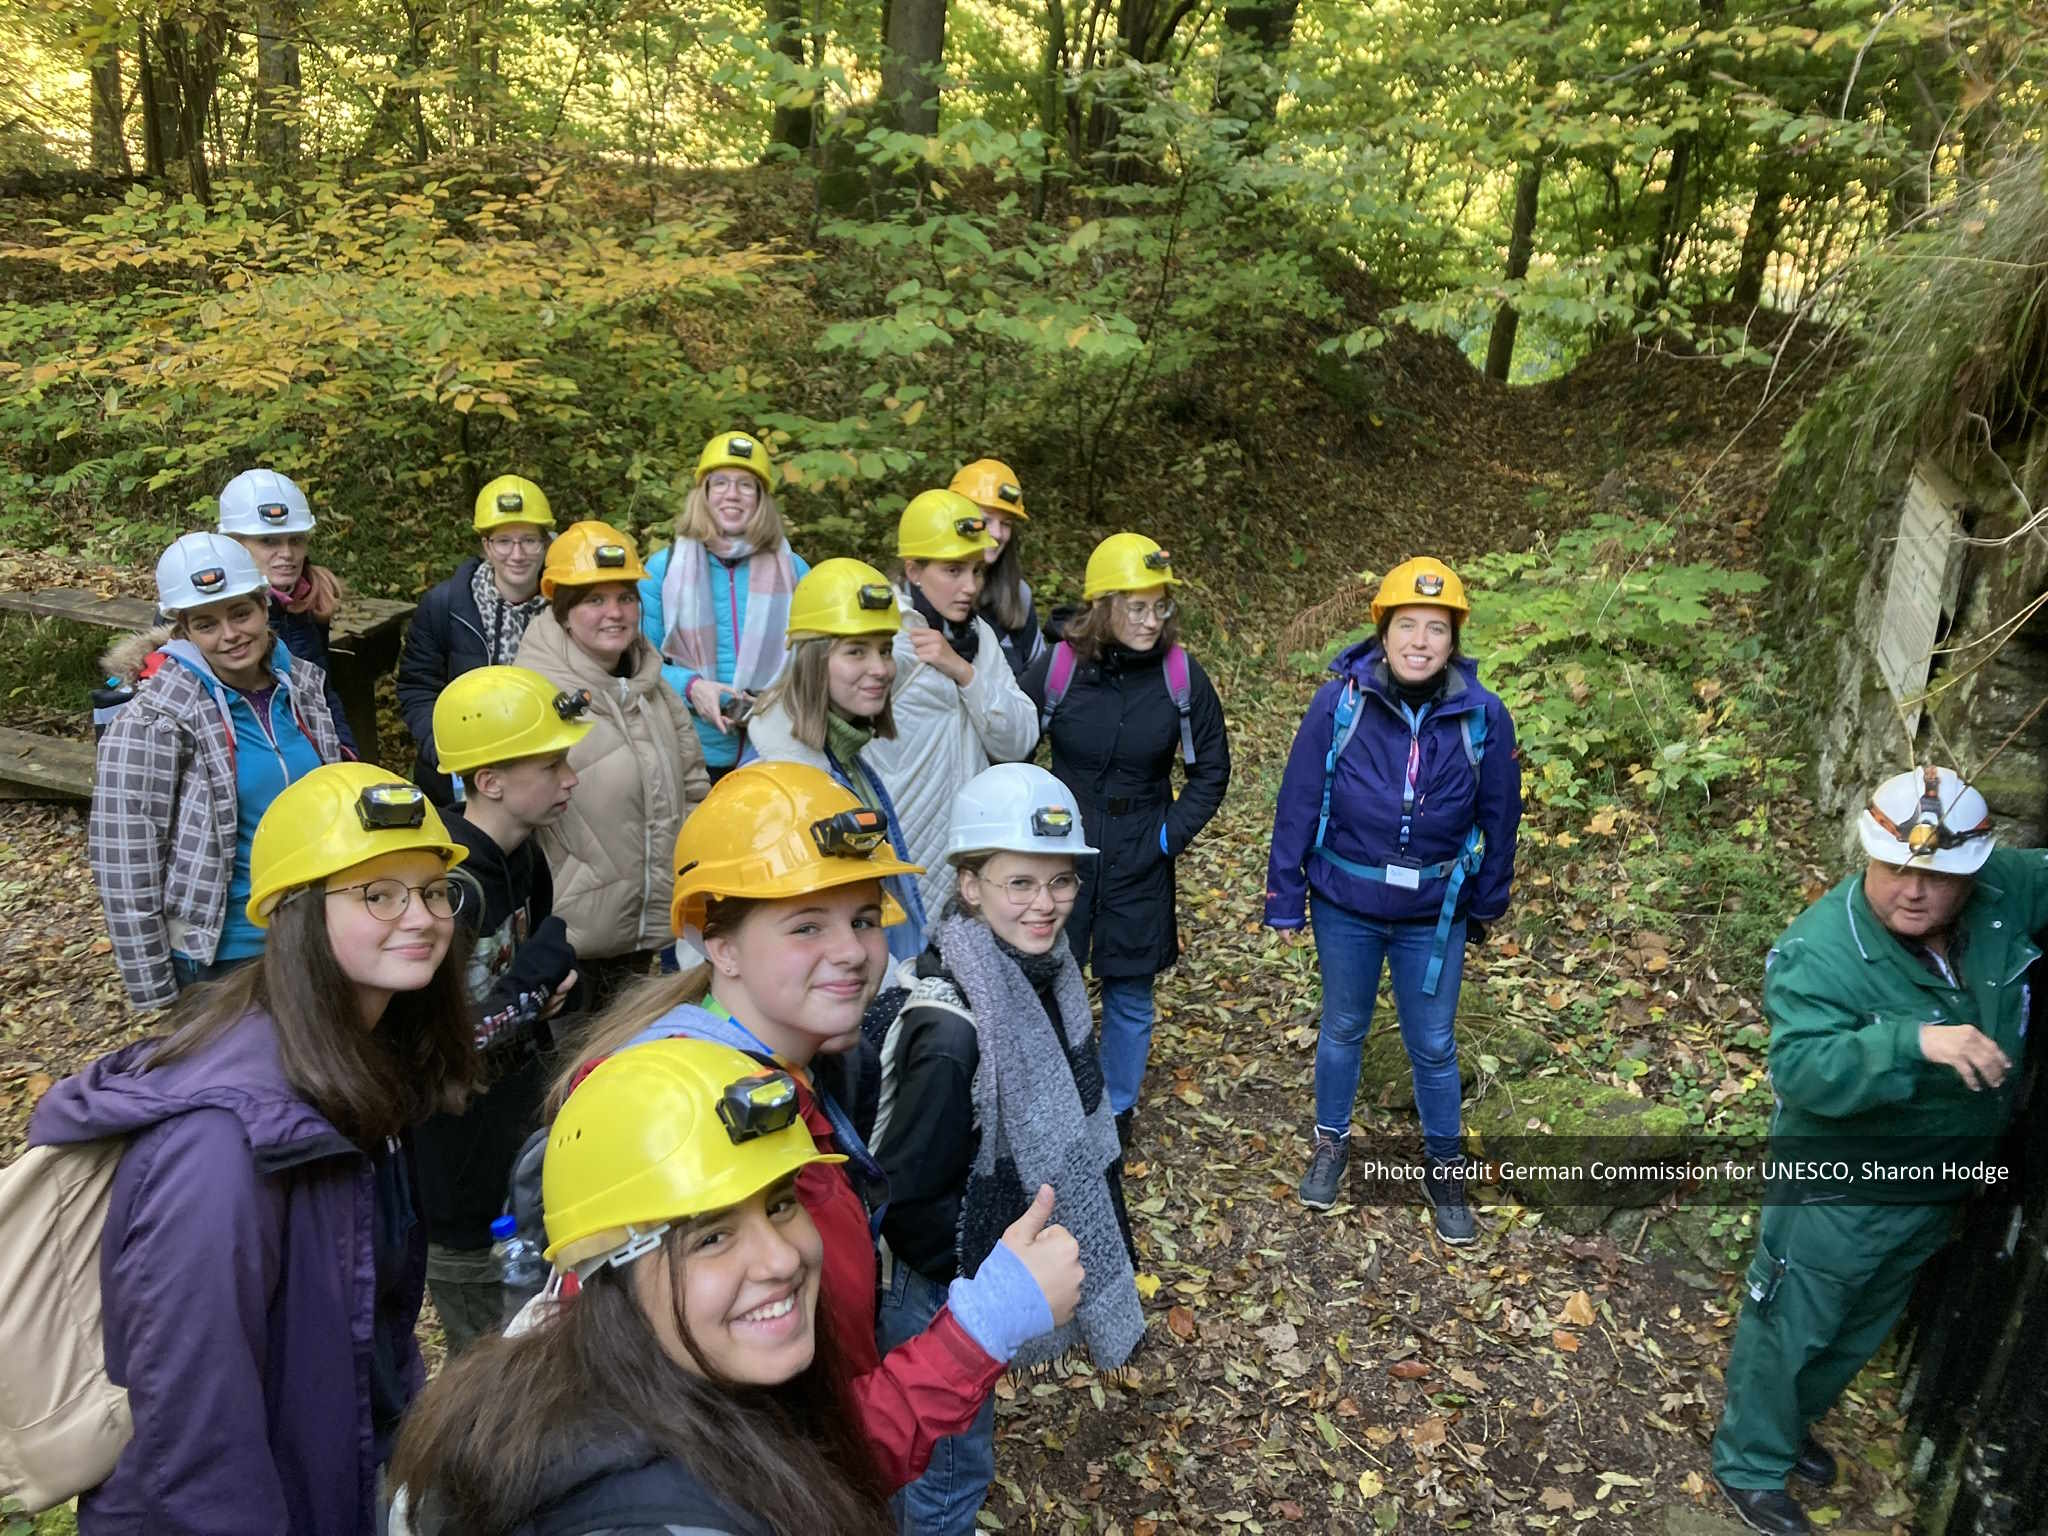 Students became active on Instagram to share the importance of safeguarding the forest at the World Heritage Site of the Erzgebirge/Krušnohoří Mining Region.